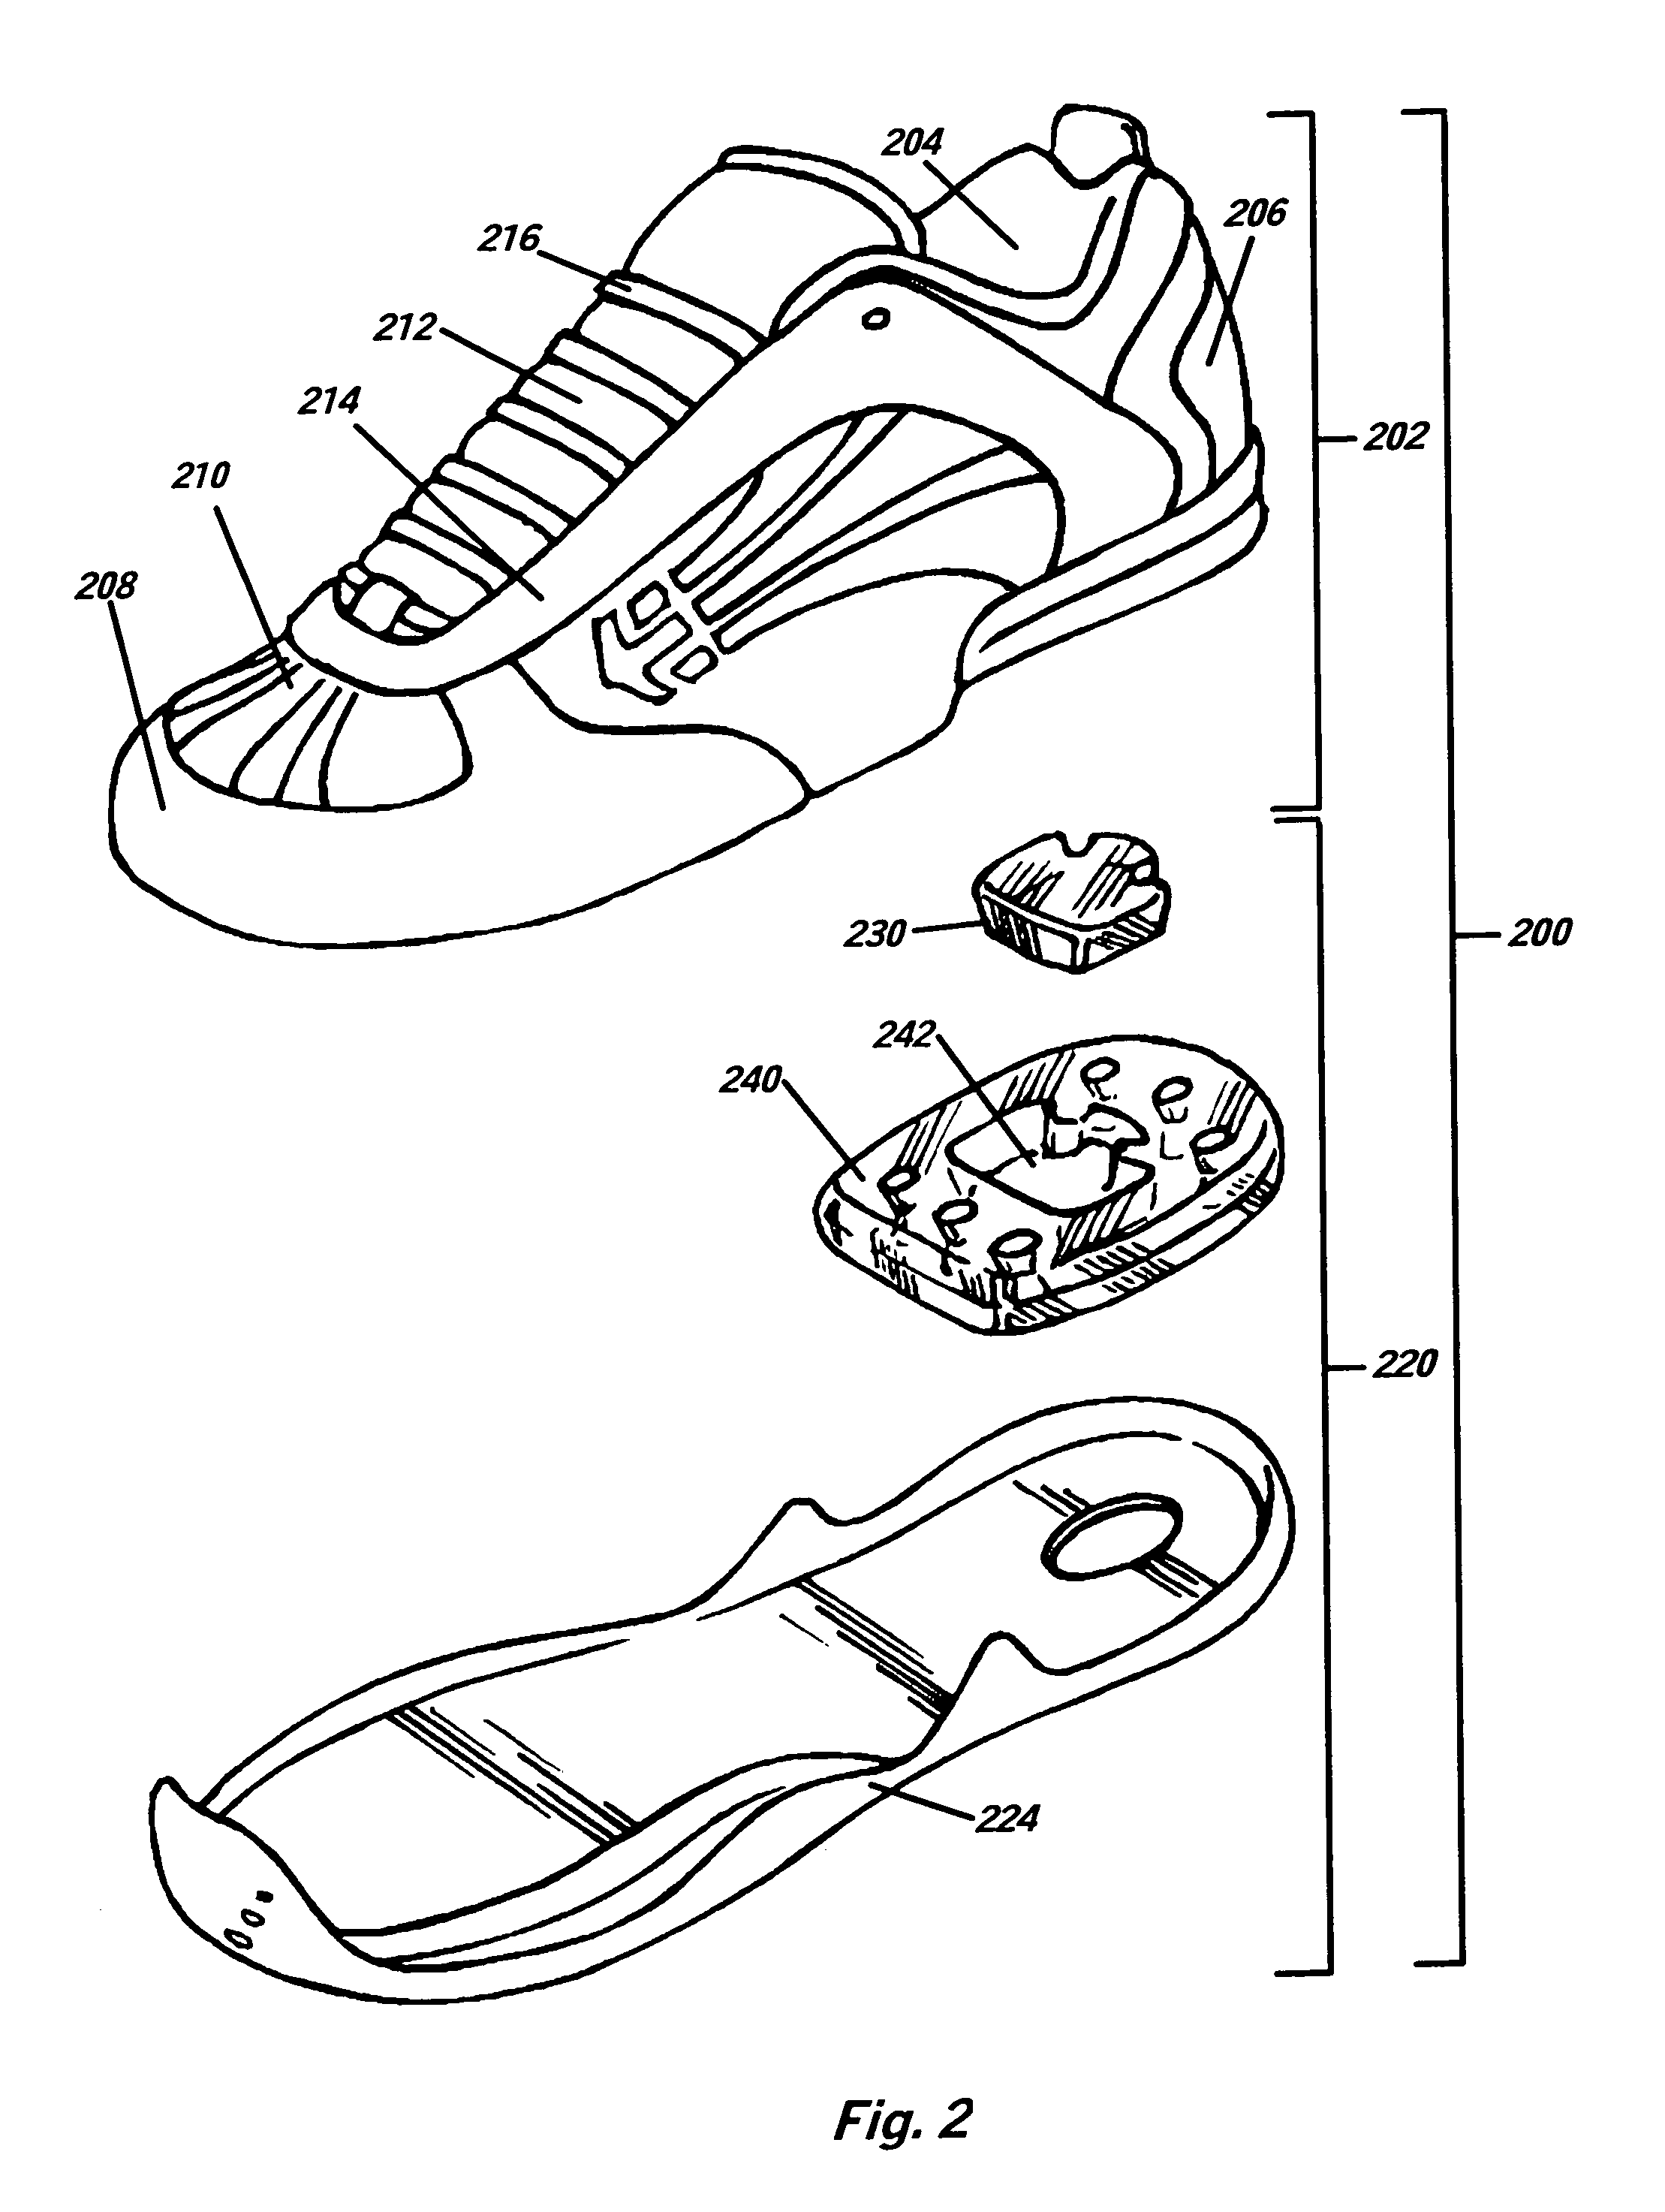 Footwear with enhanced impact protection